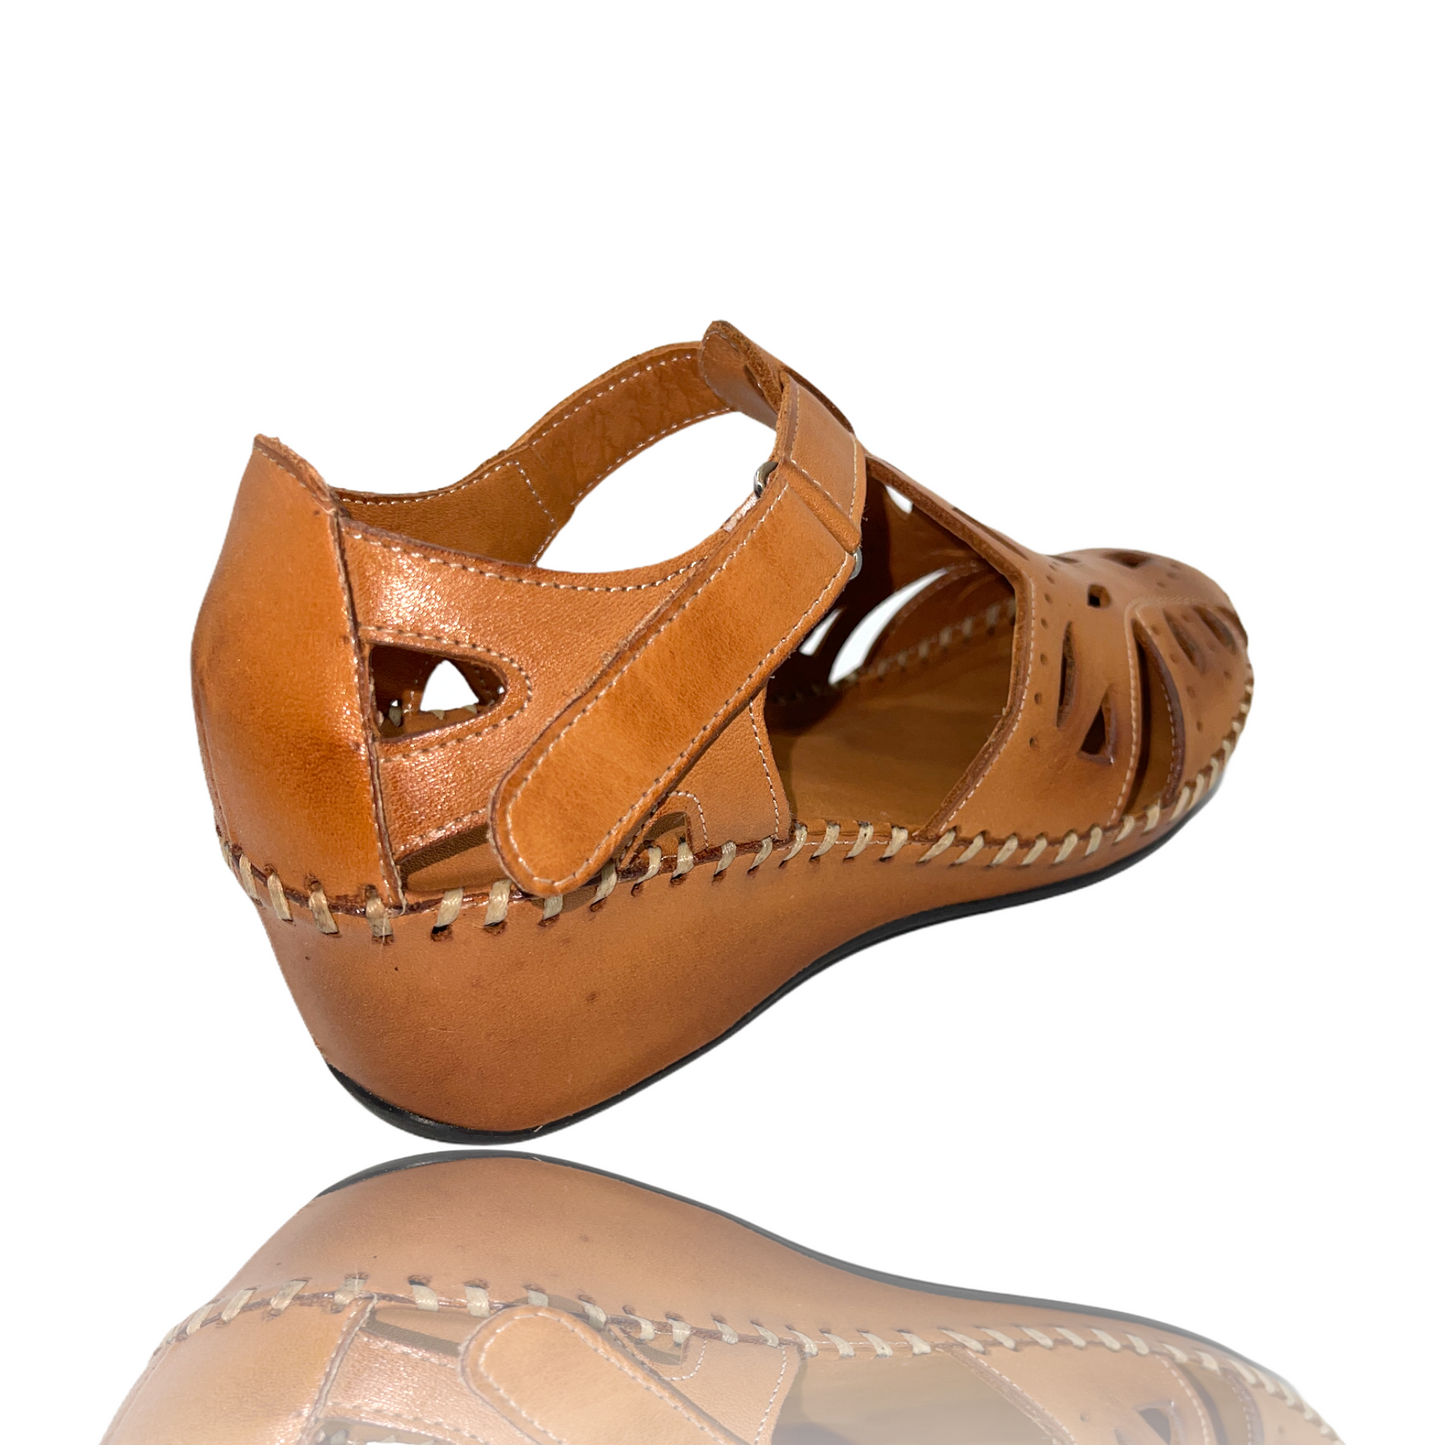 The Tonmawr Brown Leather Sandal Final Sale!